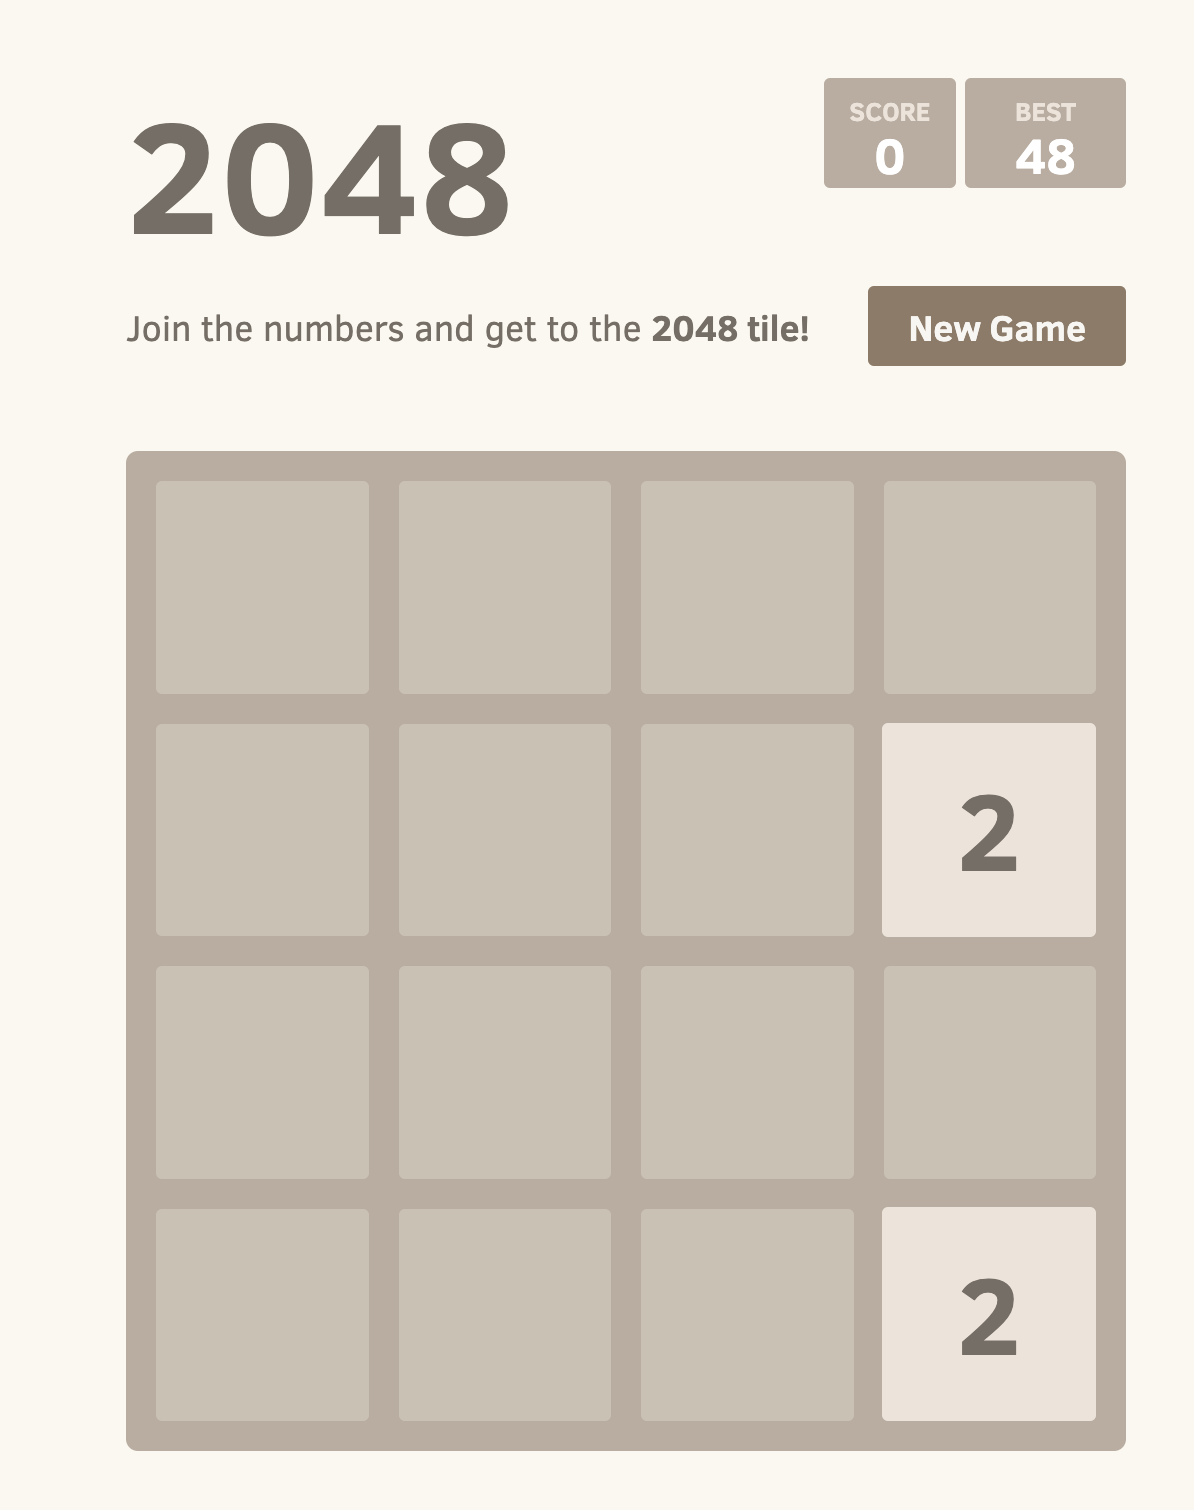 Play the 2048 game